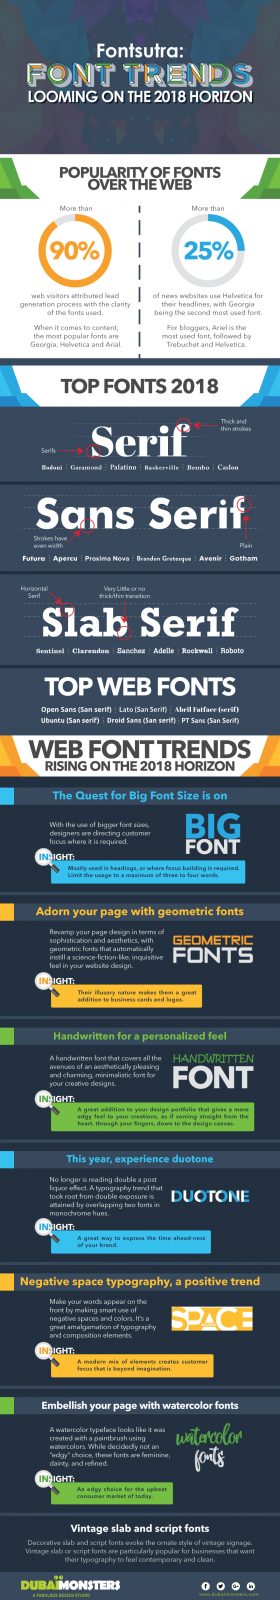 fonts trends 2018 - infographic